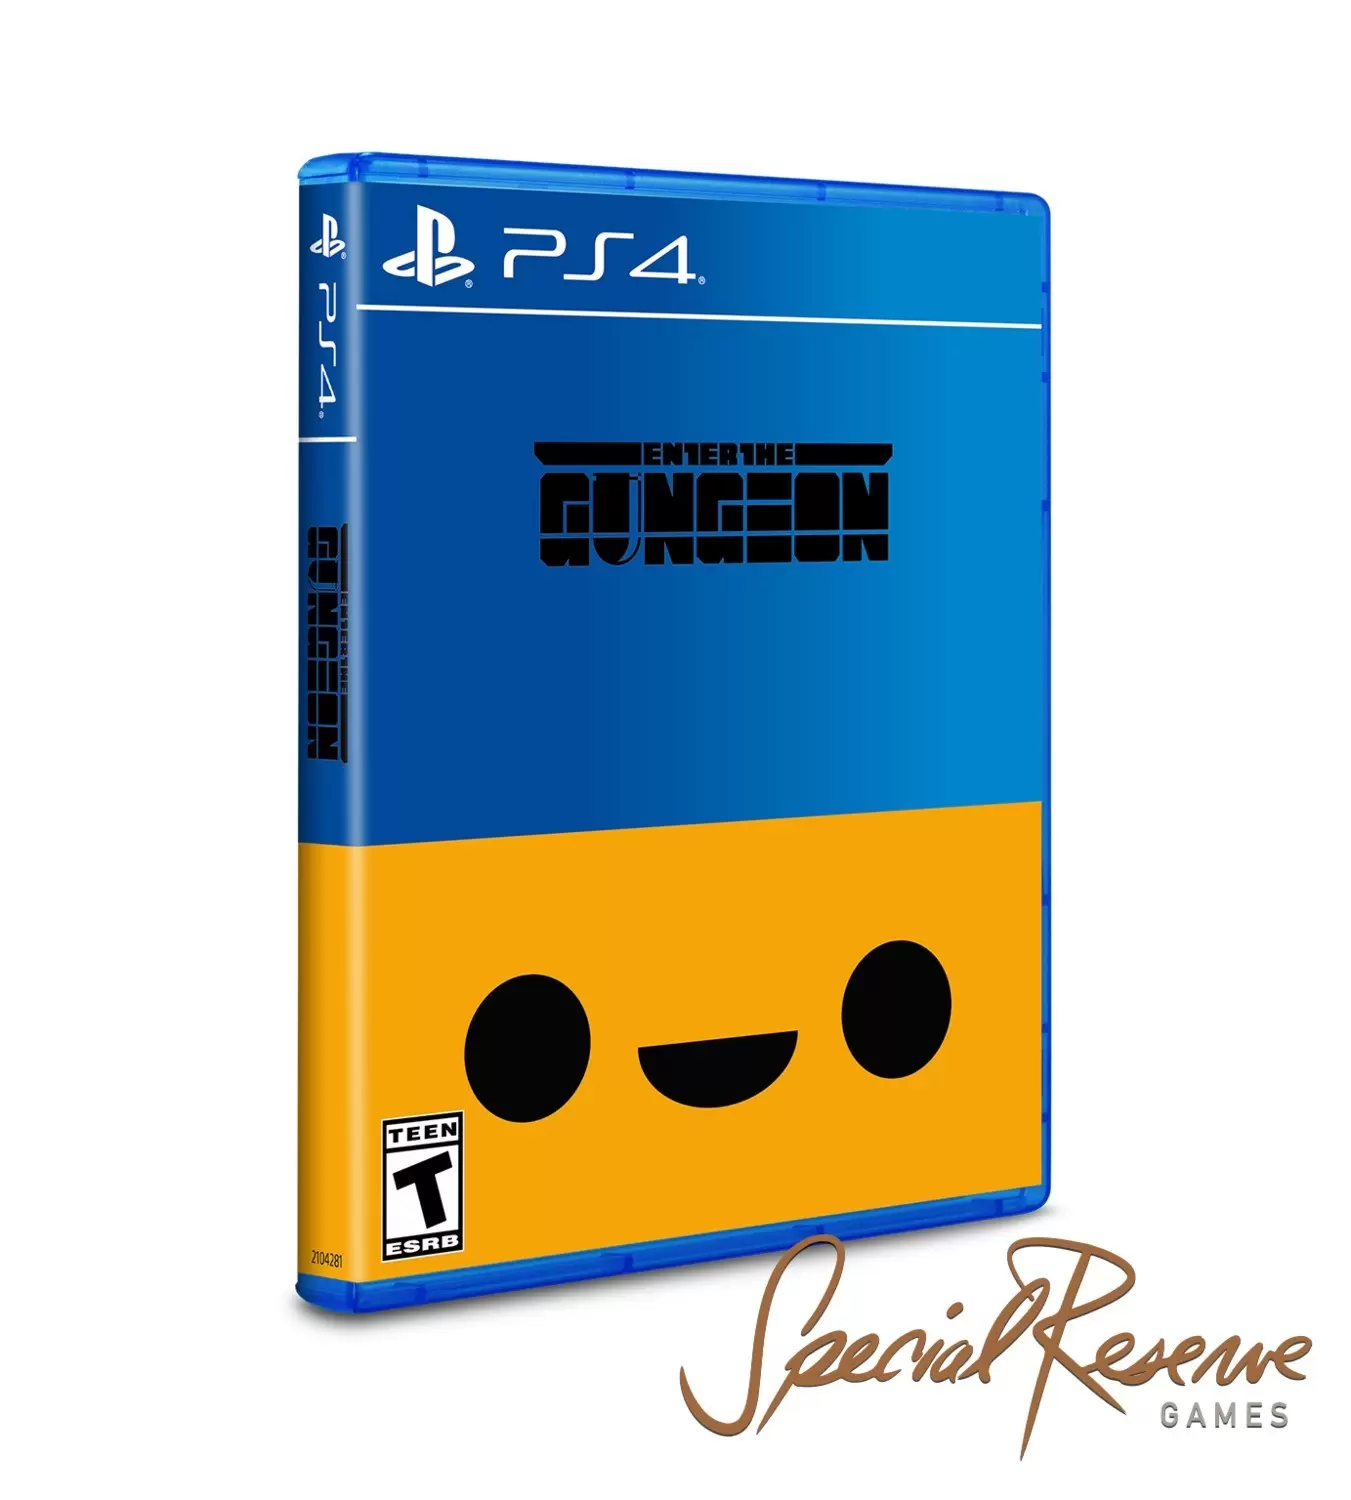 PS4 Games - Enter the Gungeon Exclusive Variant